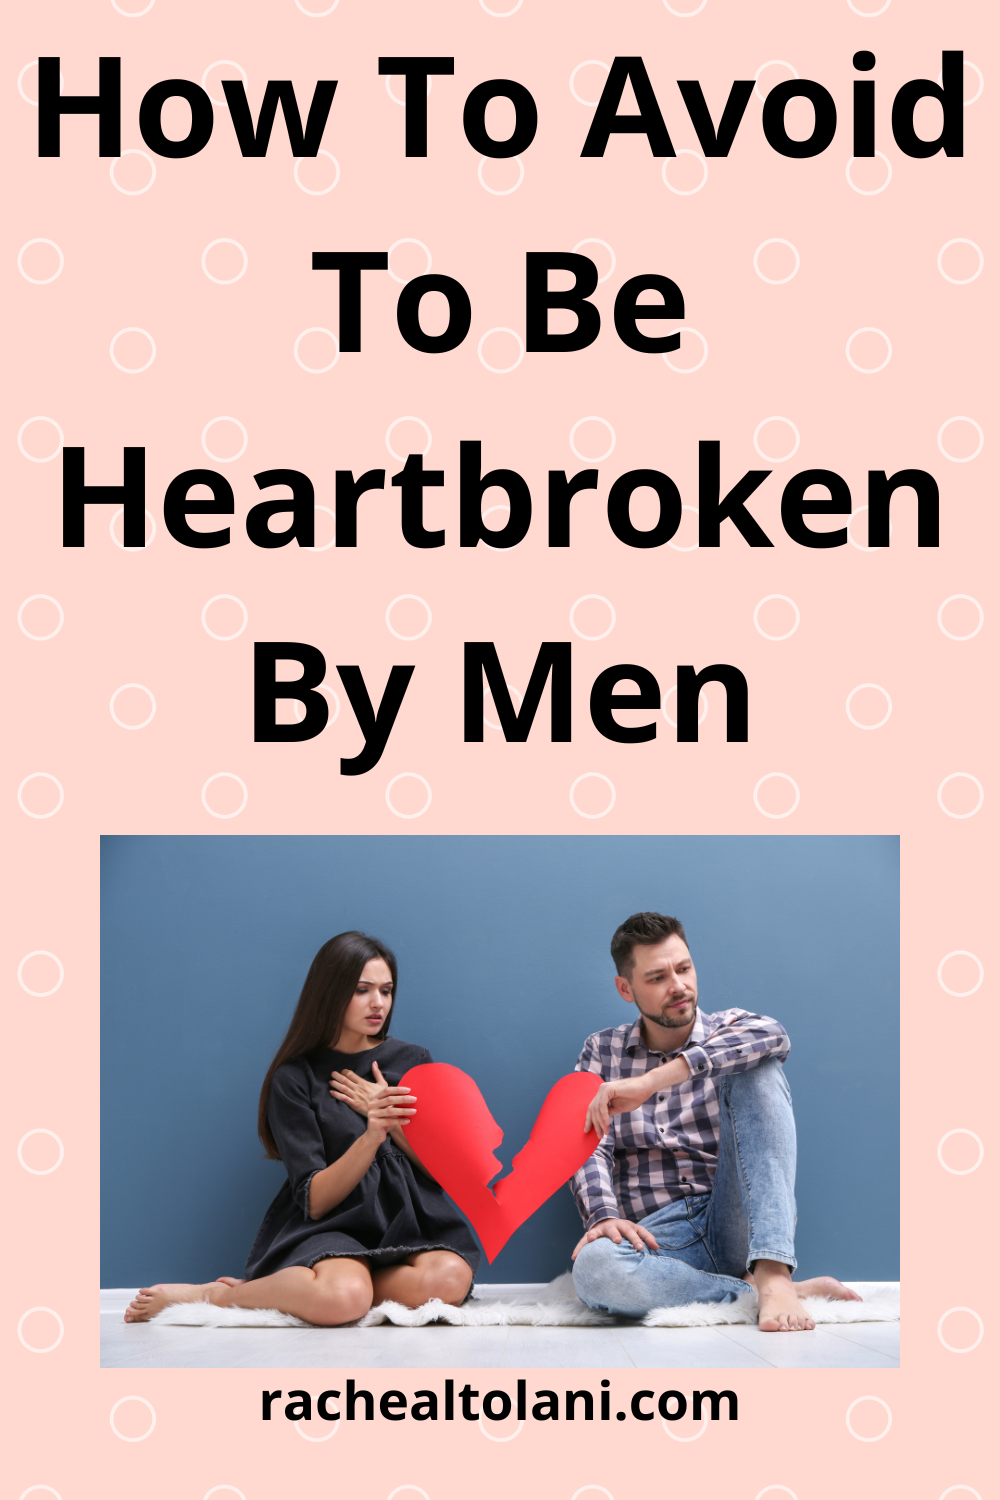 How To Avoid To Be Heartbroken By Men